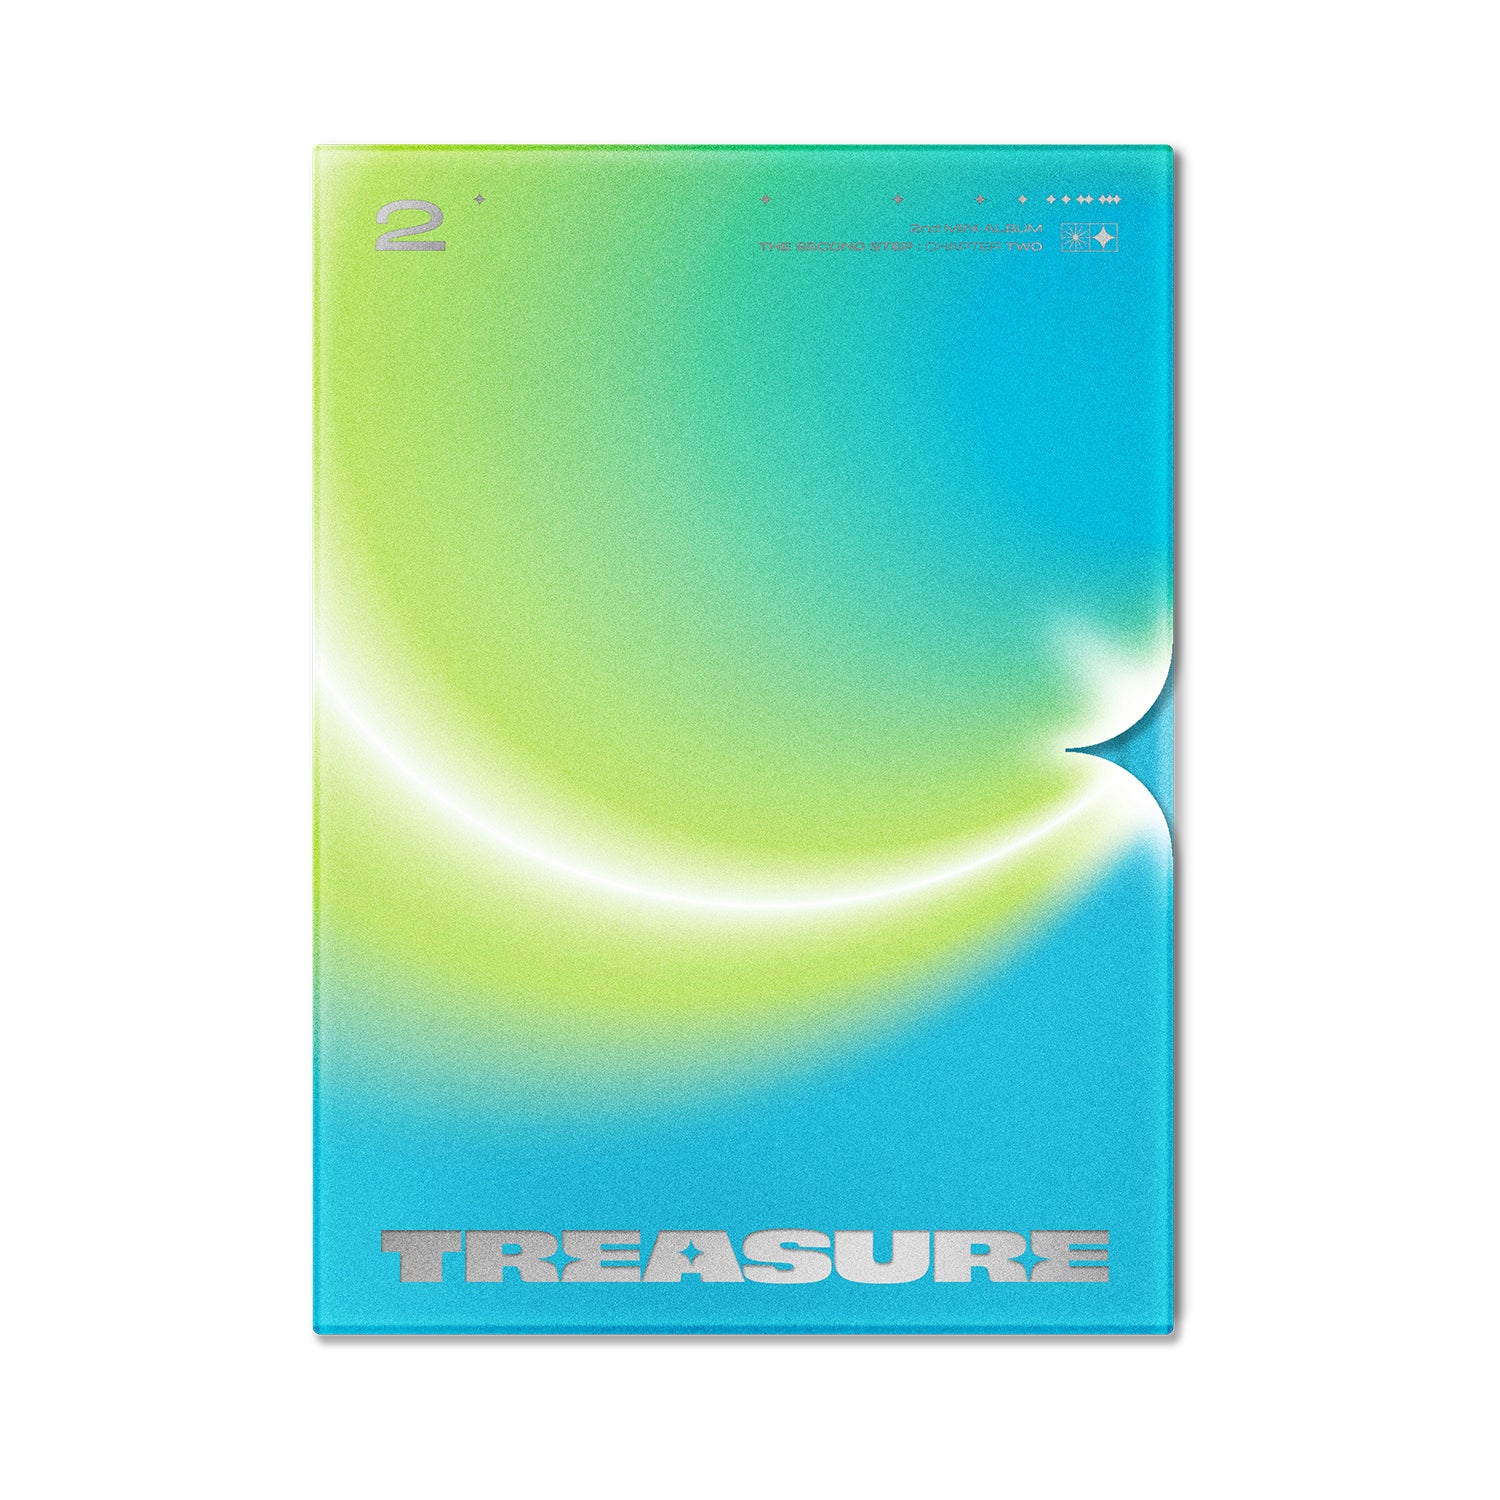 TREASURE 2ND MINI ALBUM 'THE SECOND STEP : CHAPTER TWO' (PHOTOBOOK) LIGHT GREEN COVER